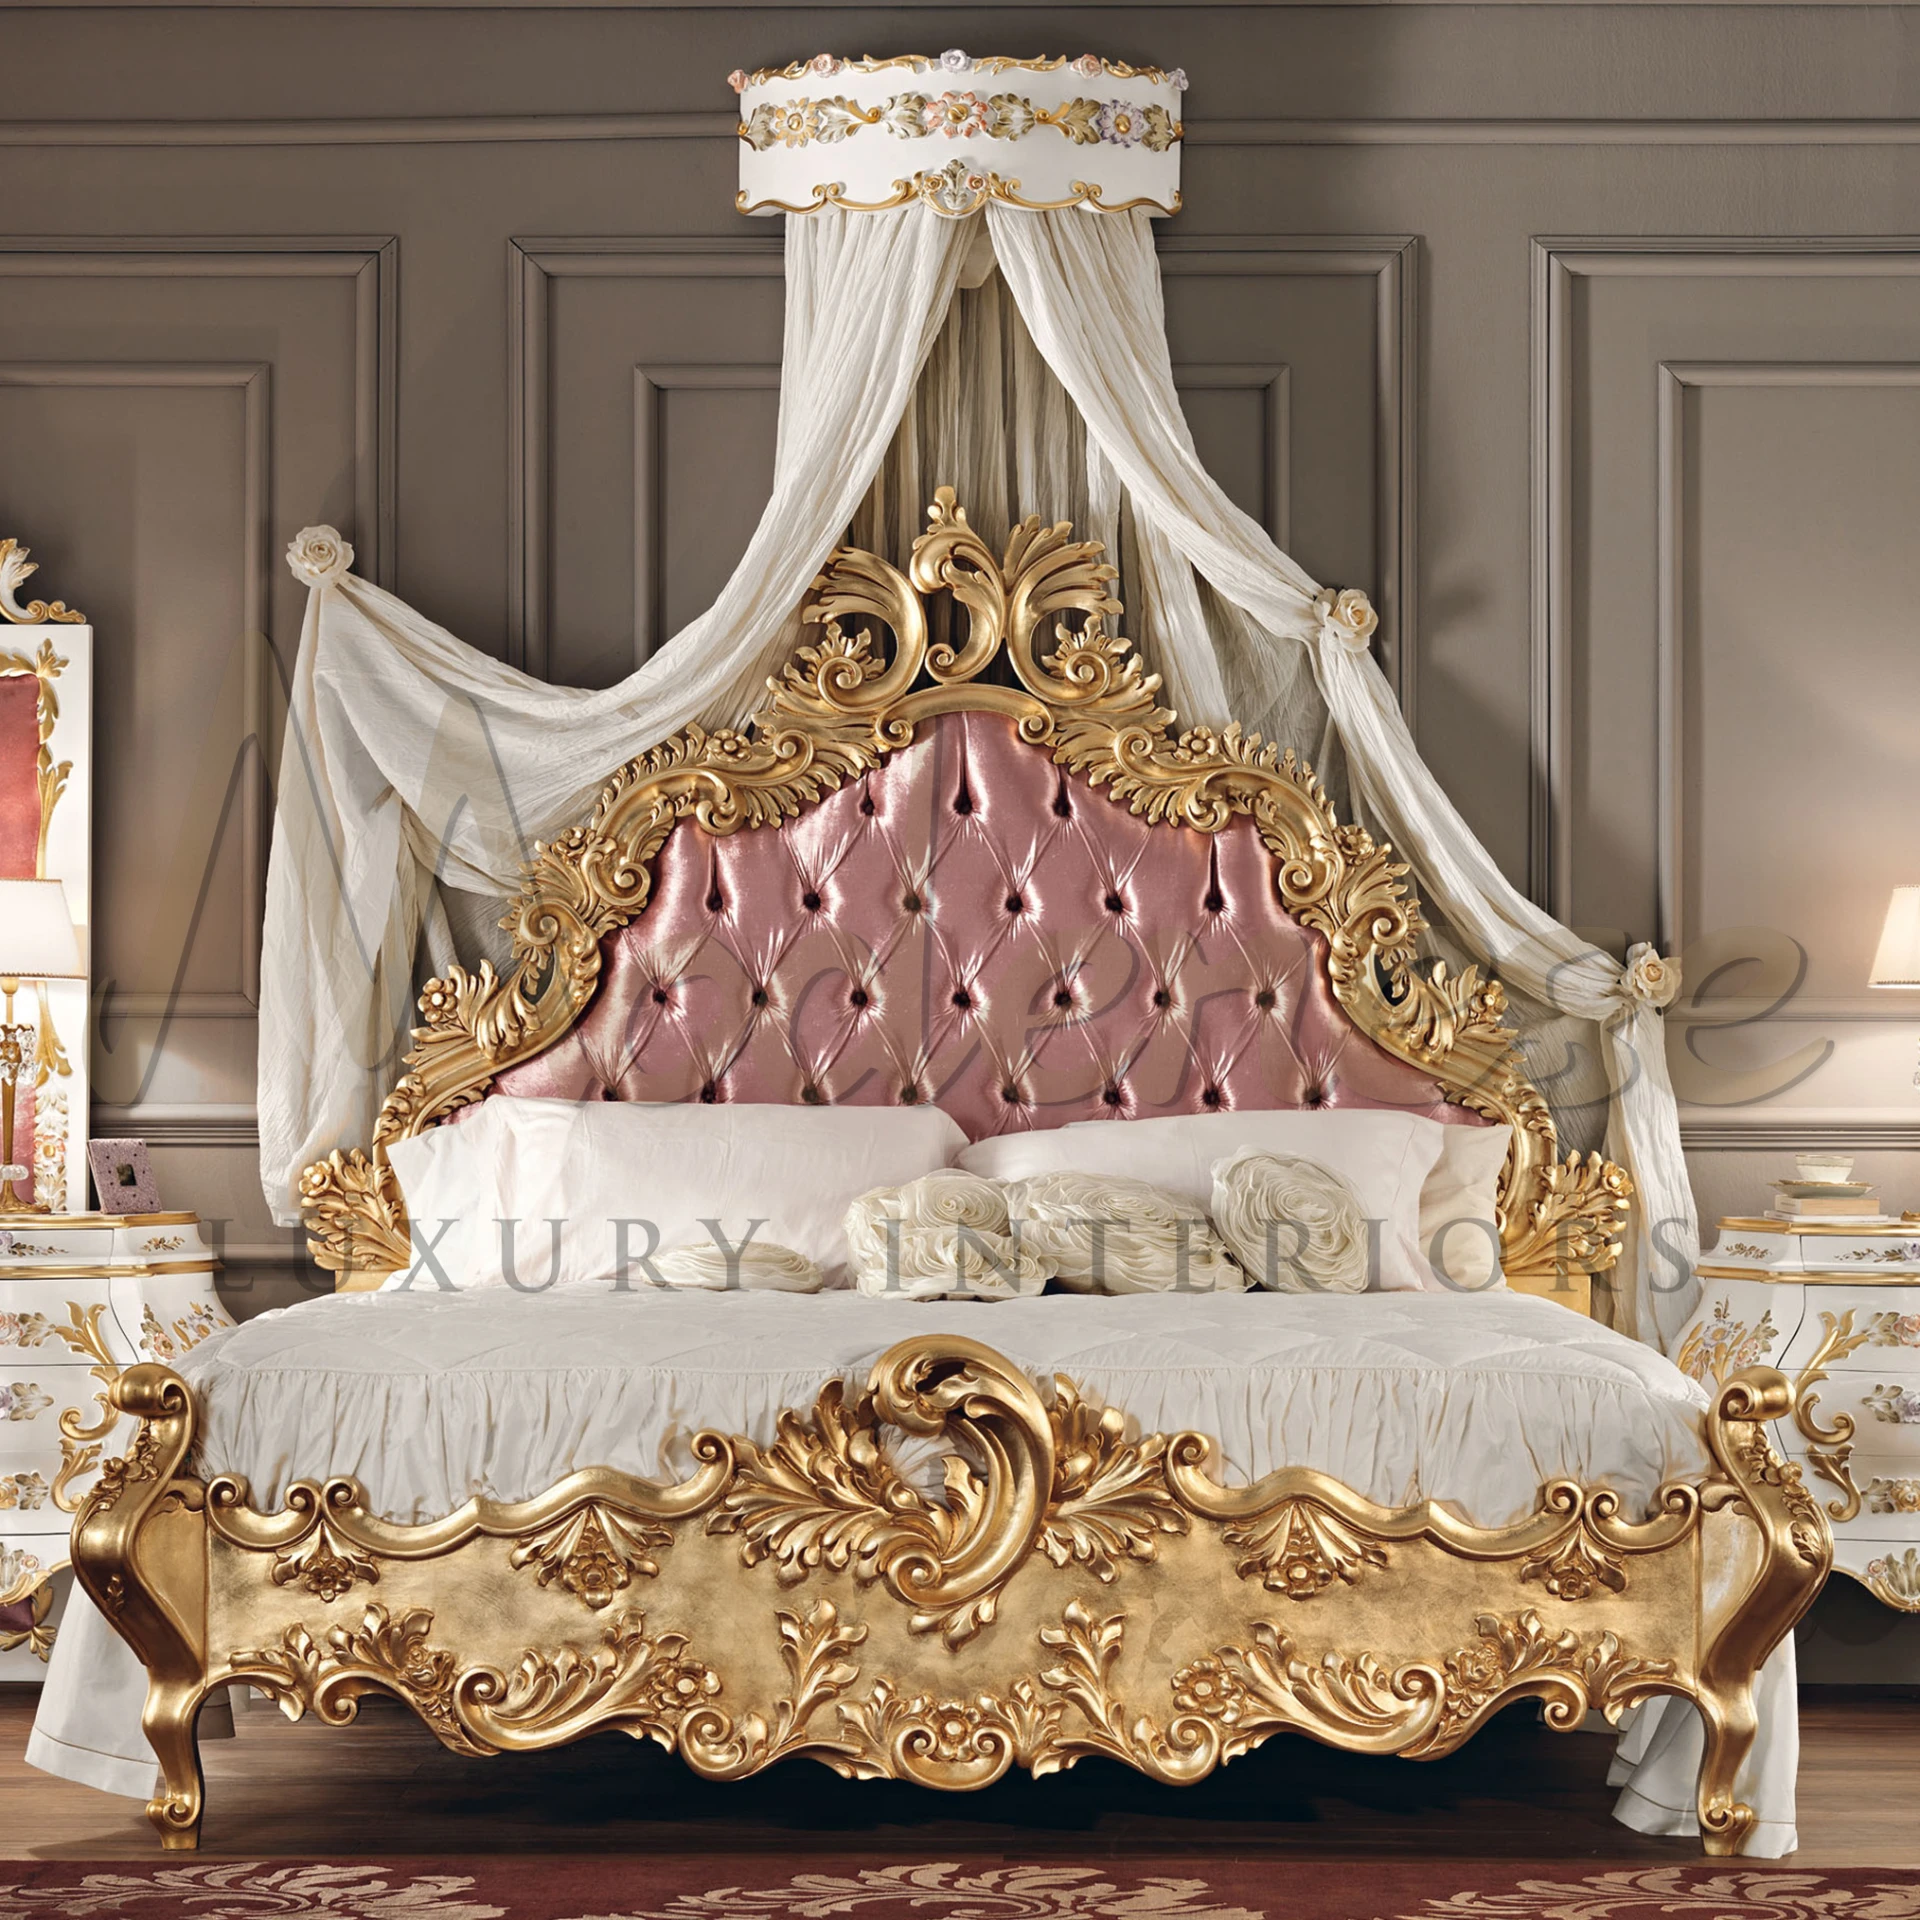 Luxurious canopy bed with pink tufted headboard and gold frame created by Modenese Furniture, draped with sheer curtains against a paneled wall.